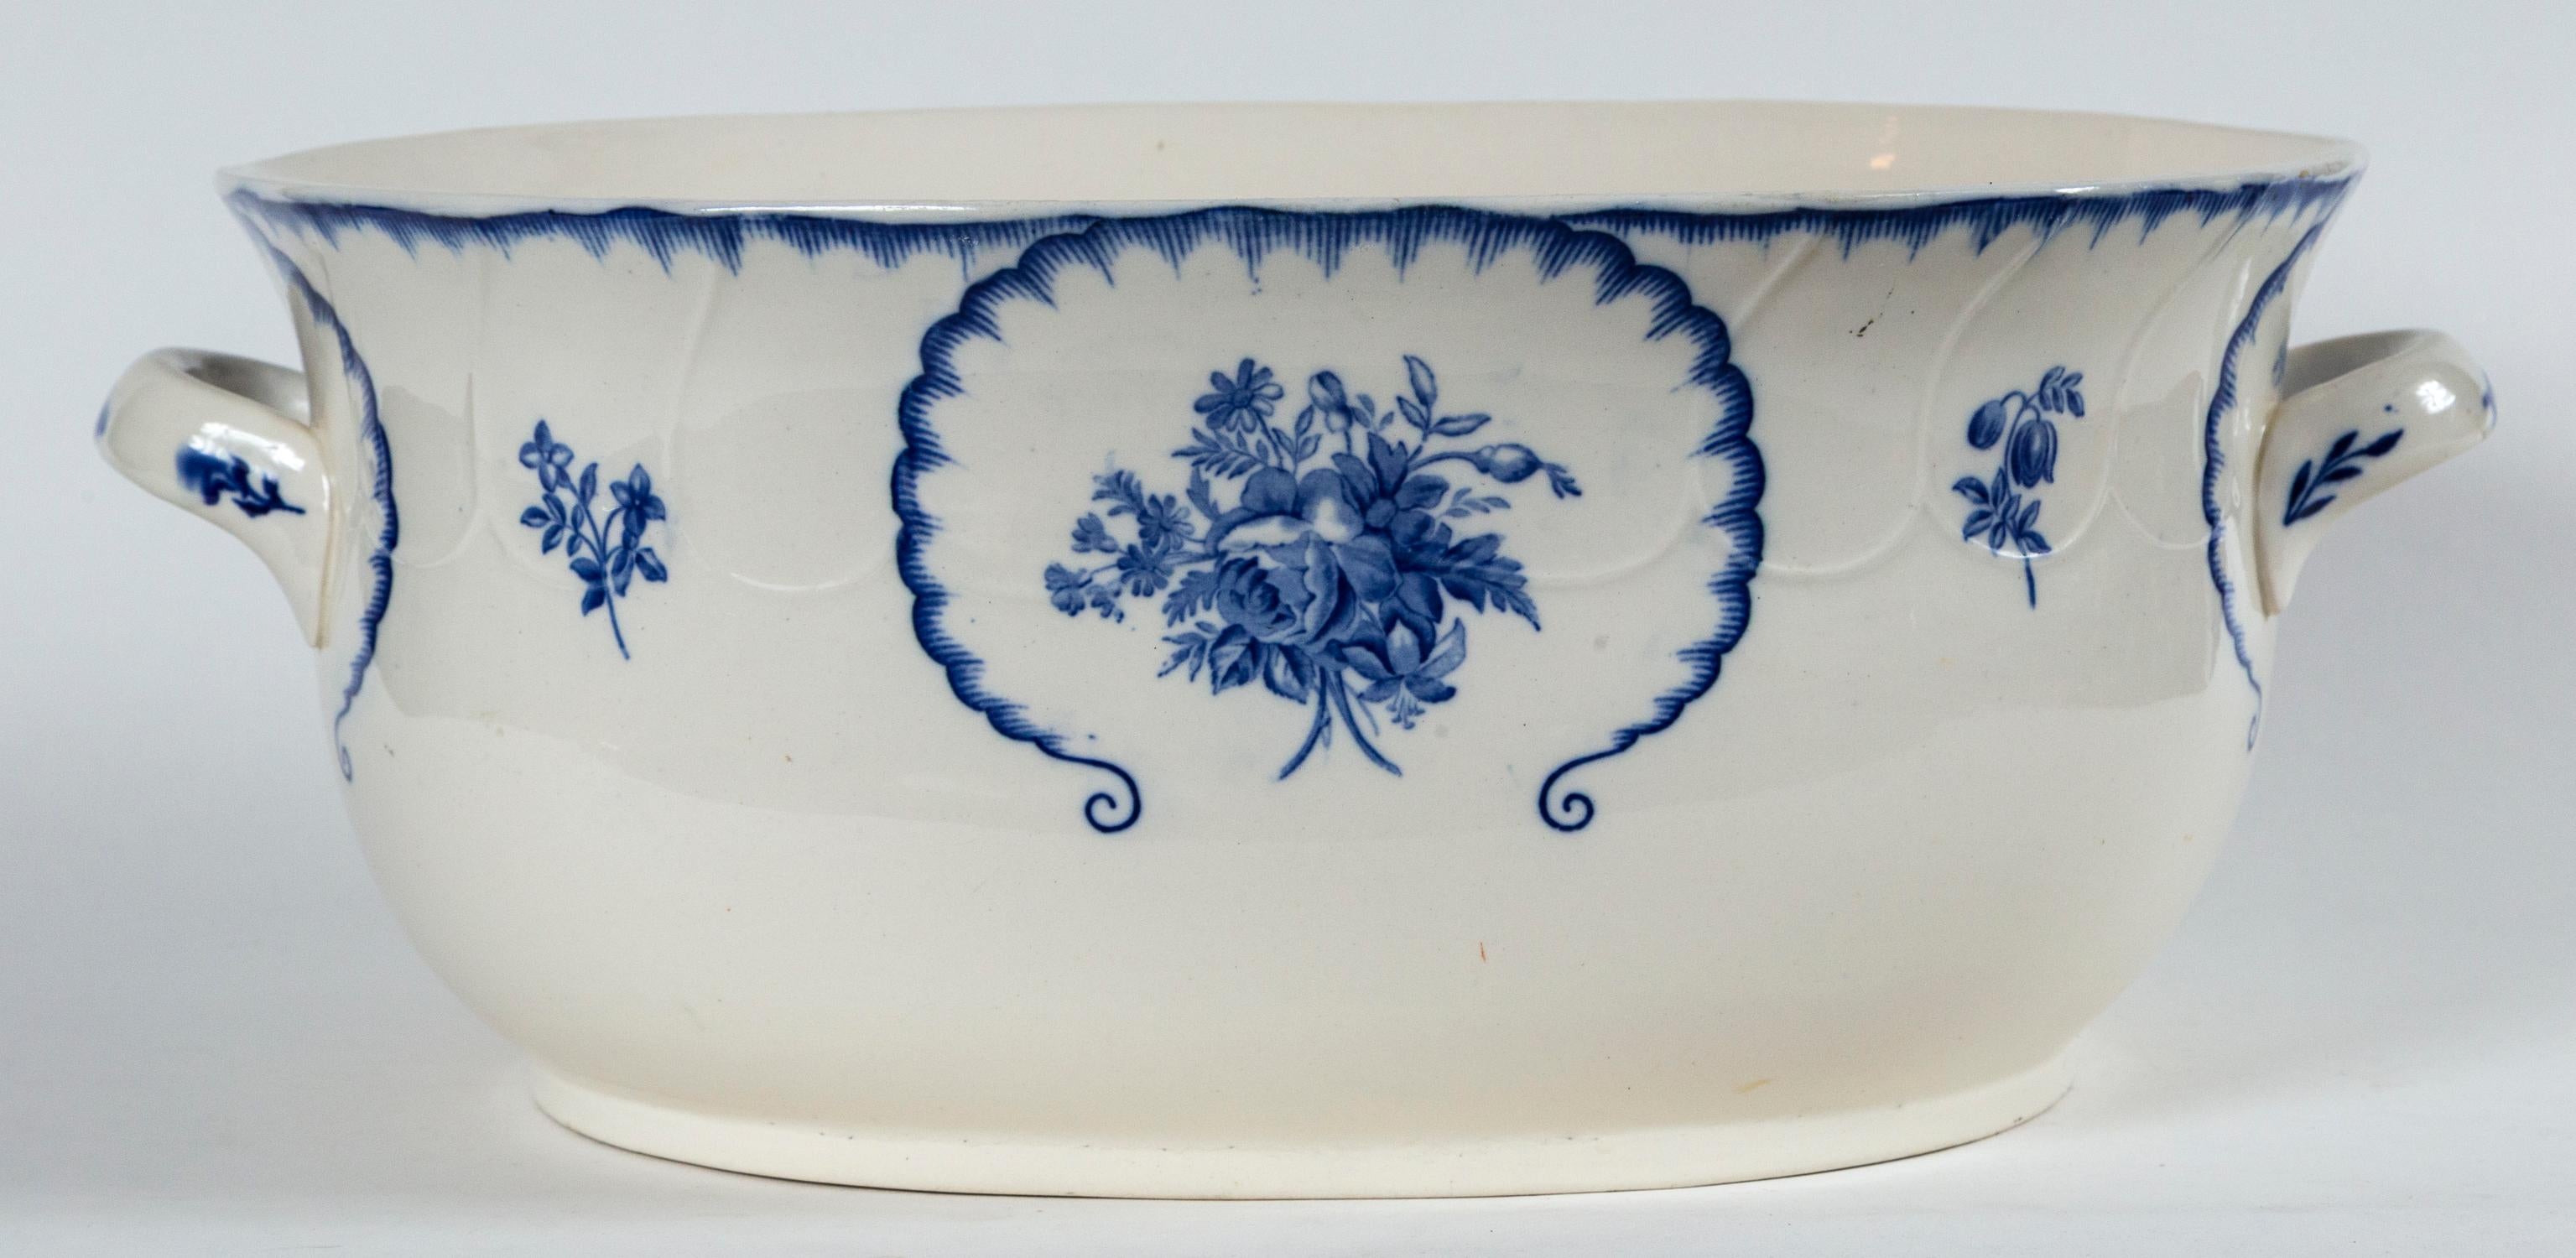 English ironstone foot bath, late 19th century. Blue floral transferware design on white ground. Oval shape with 2 handles. Marked on bottom. A great display piece.
 